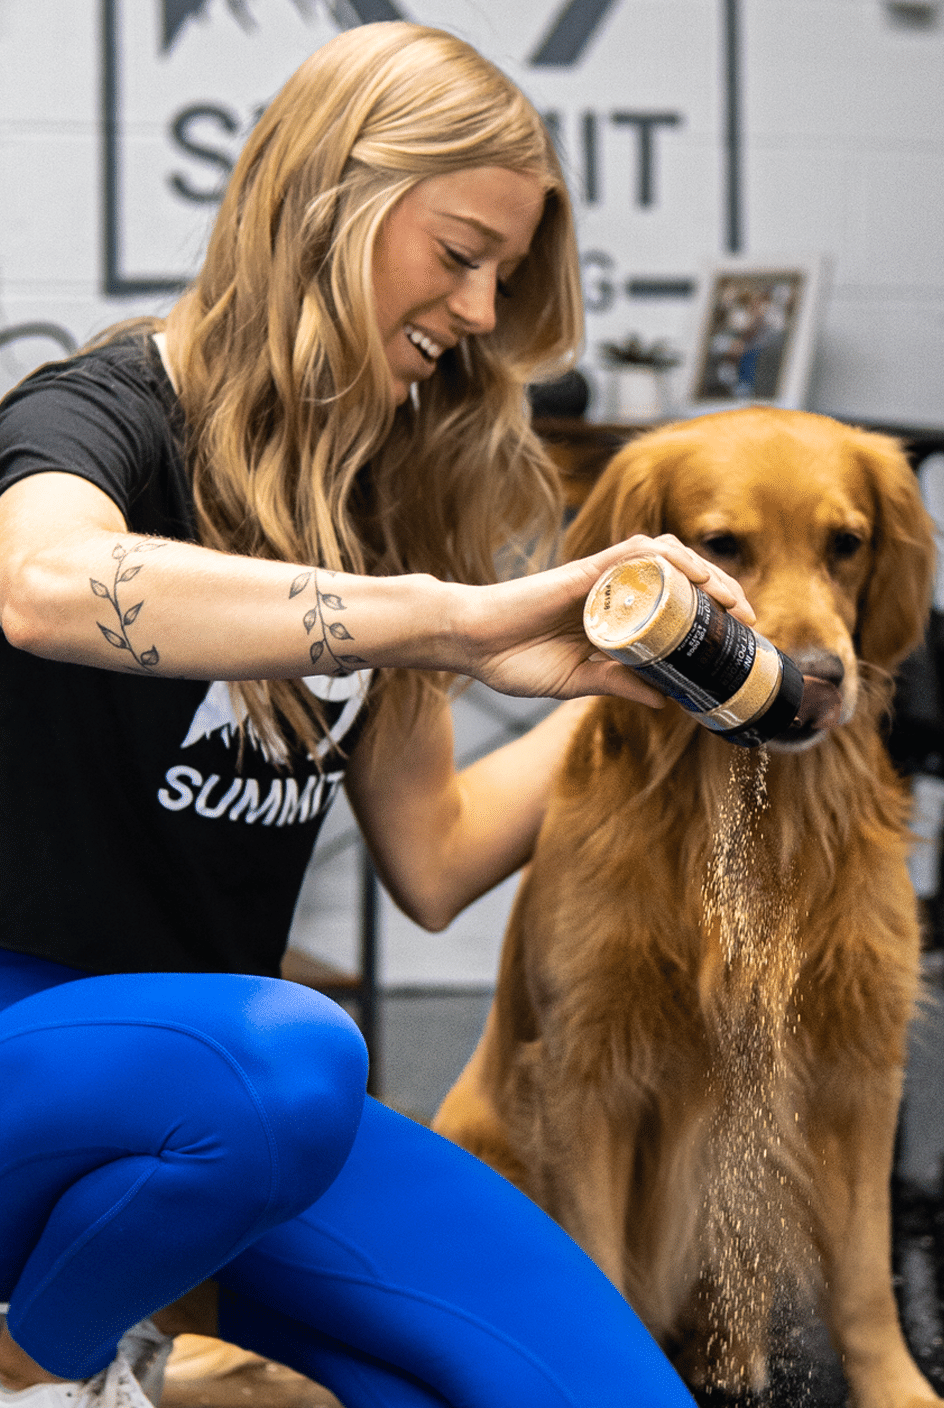 Female dog owner gives CBDOps hemp infused CBD pet powder product to help with her dogs stress and pain.